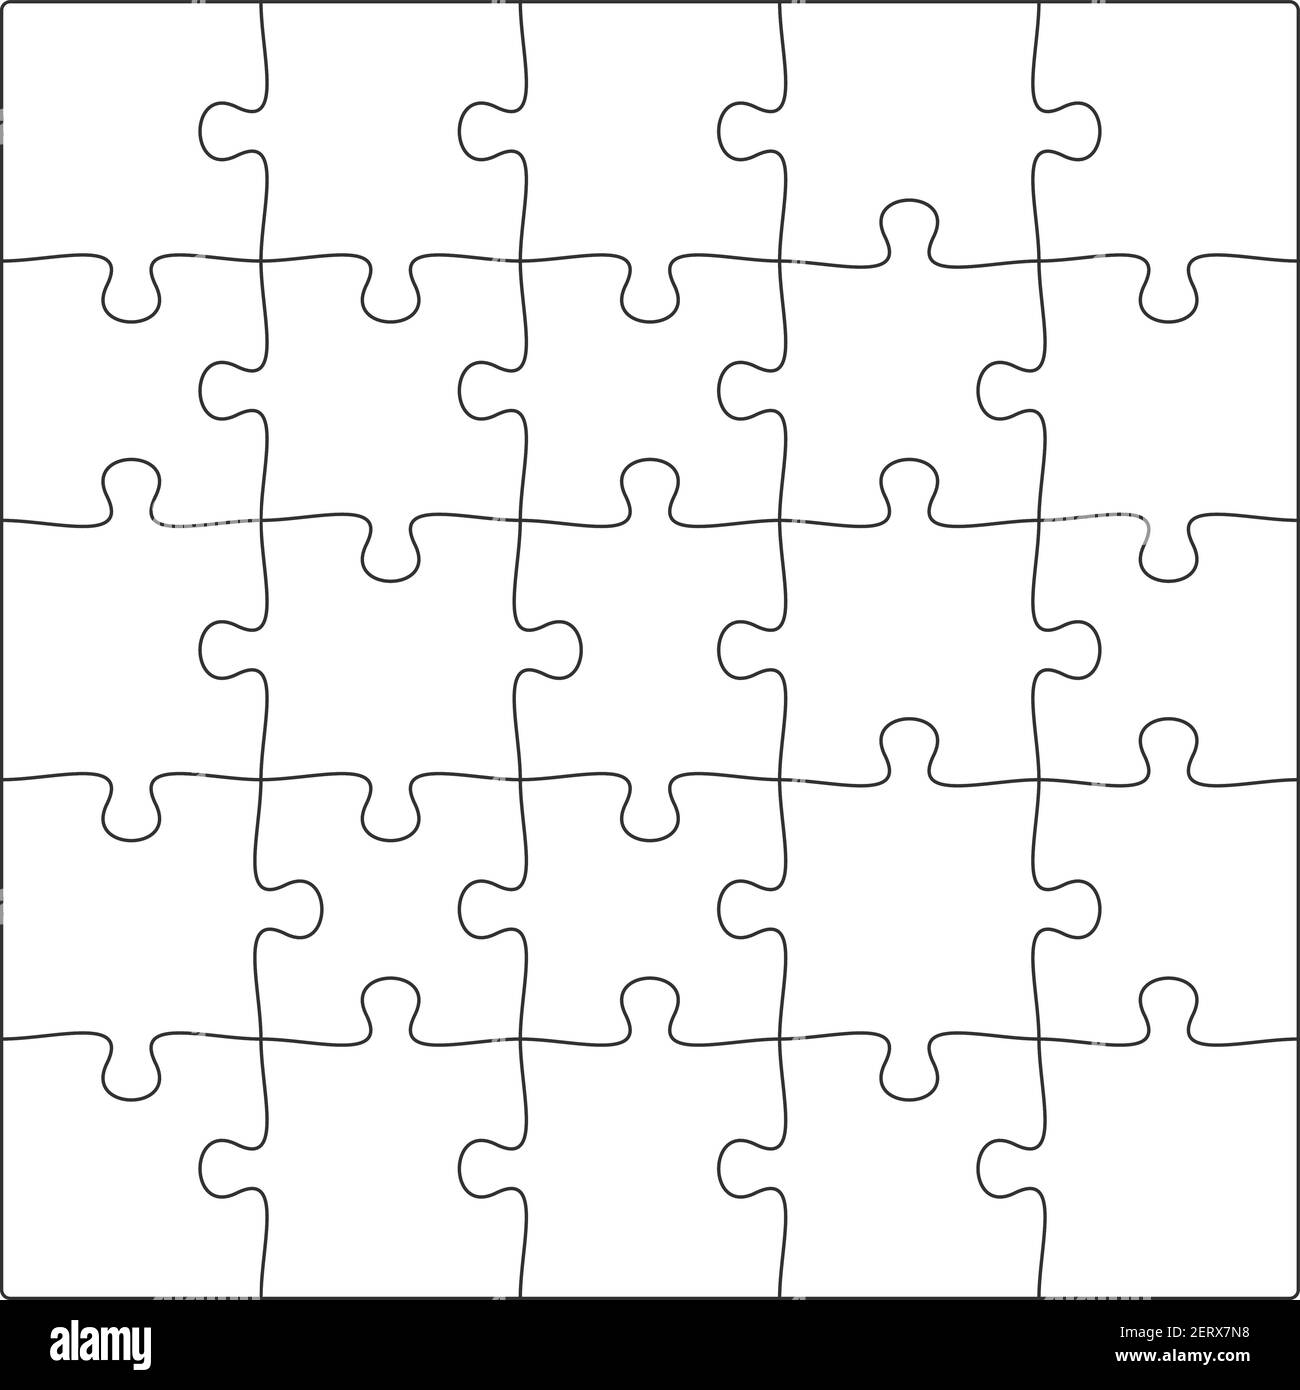 780+ Silhouette Of A Blank Puzzle Template Stock Illustrations